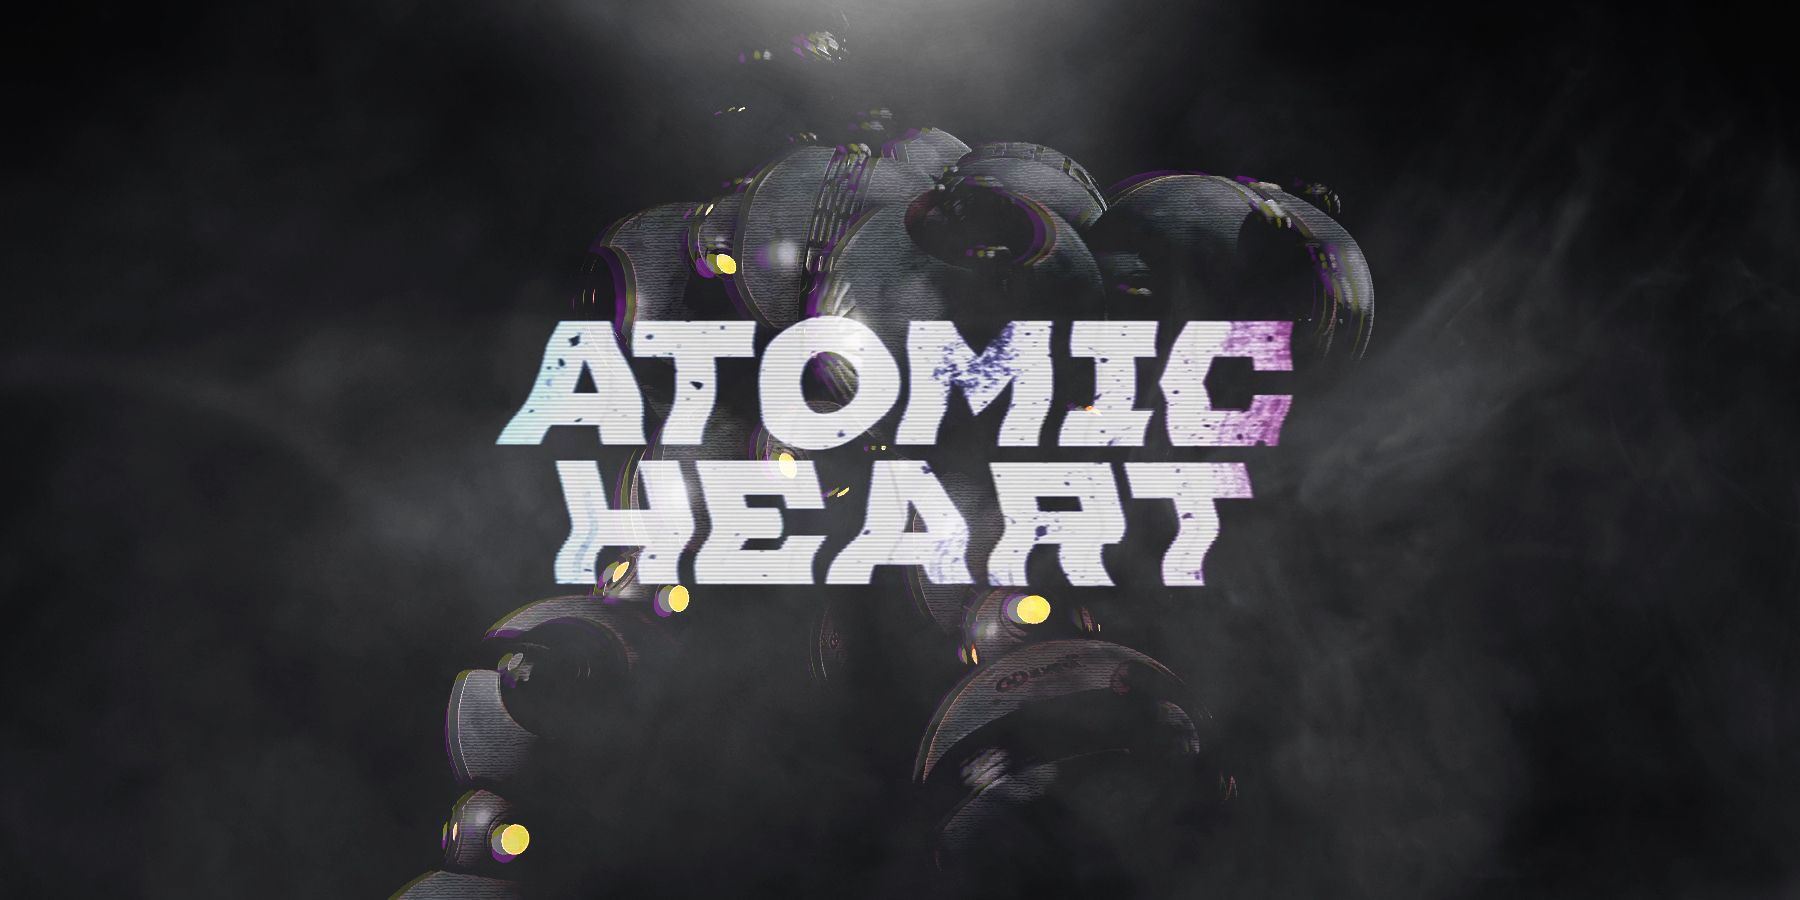 Atomic Heart - BEA-D DLC release date revealed